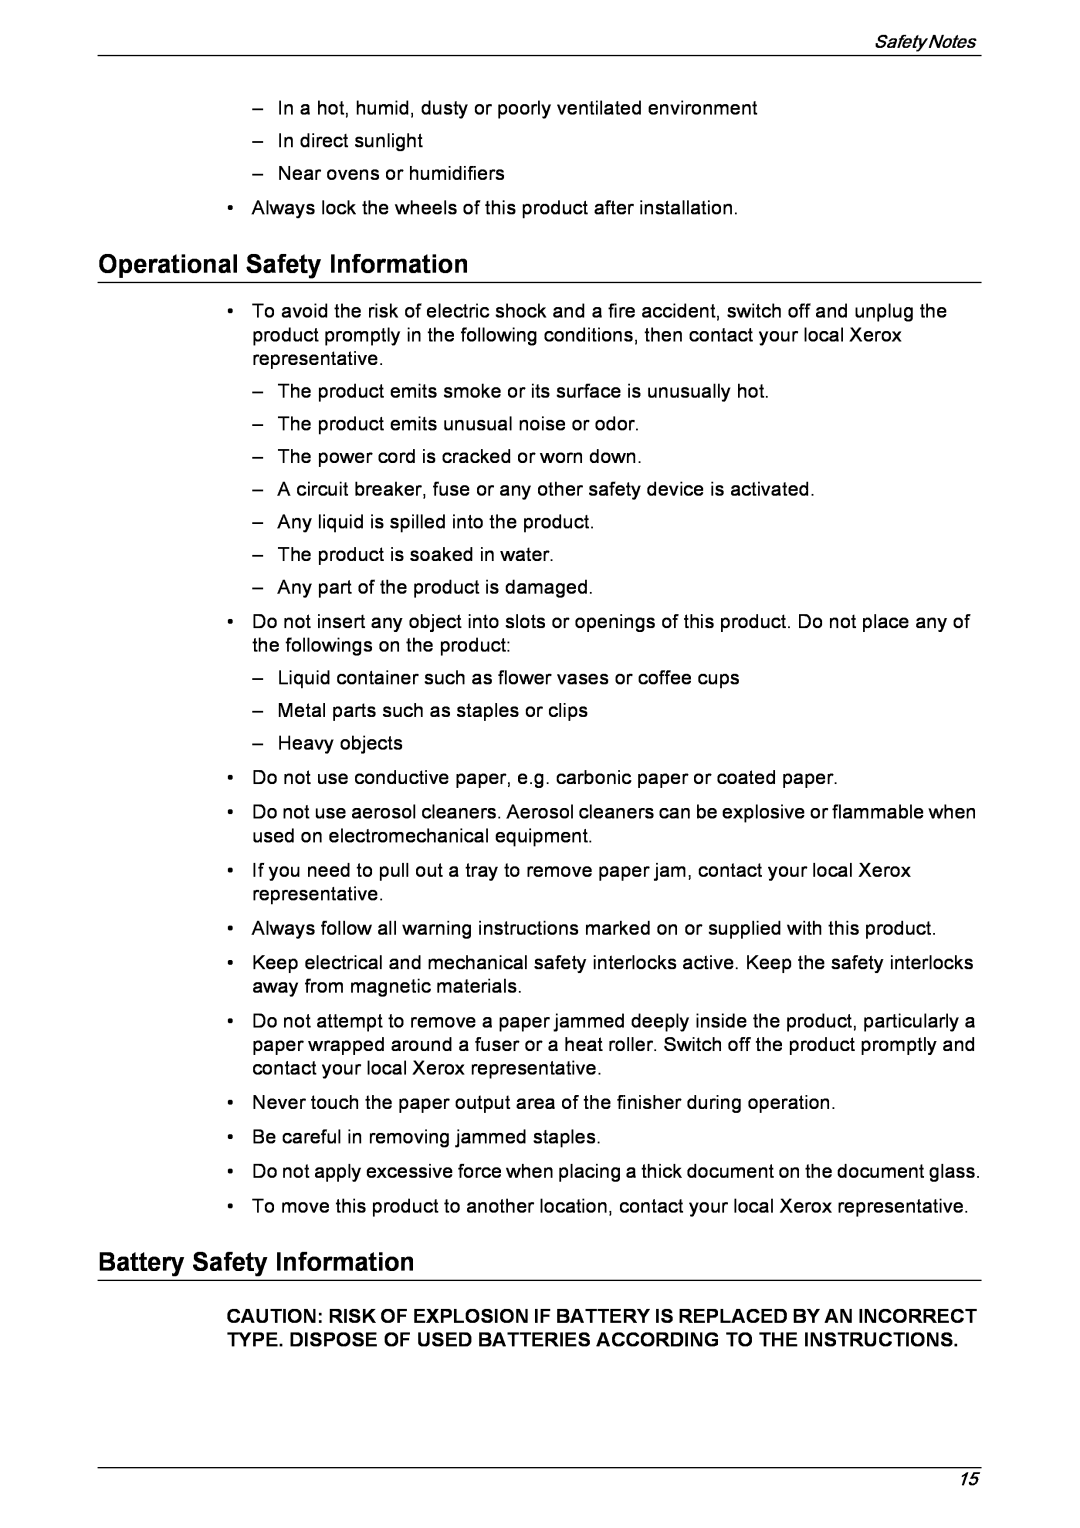 Xerox 5230 manual Operational Safety Information, Battery Safety Information 